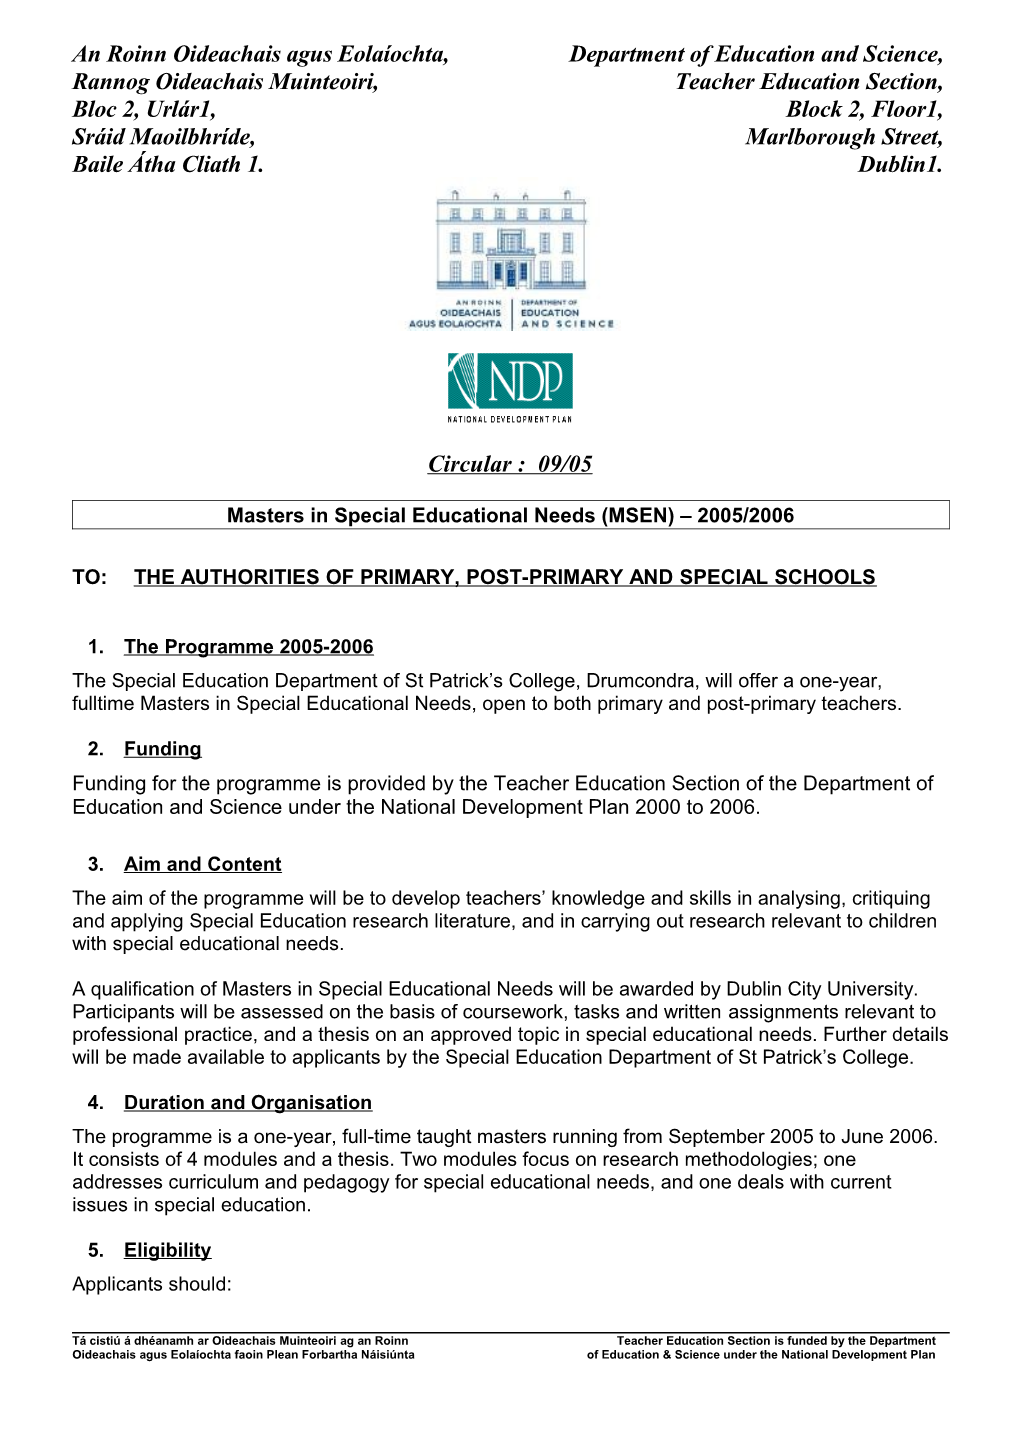 Primary Circular 09/05 - Masters in Special Educational Needs (MSEN) 2005/2006 (File Format